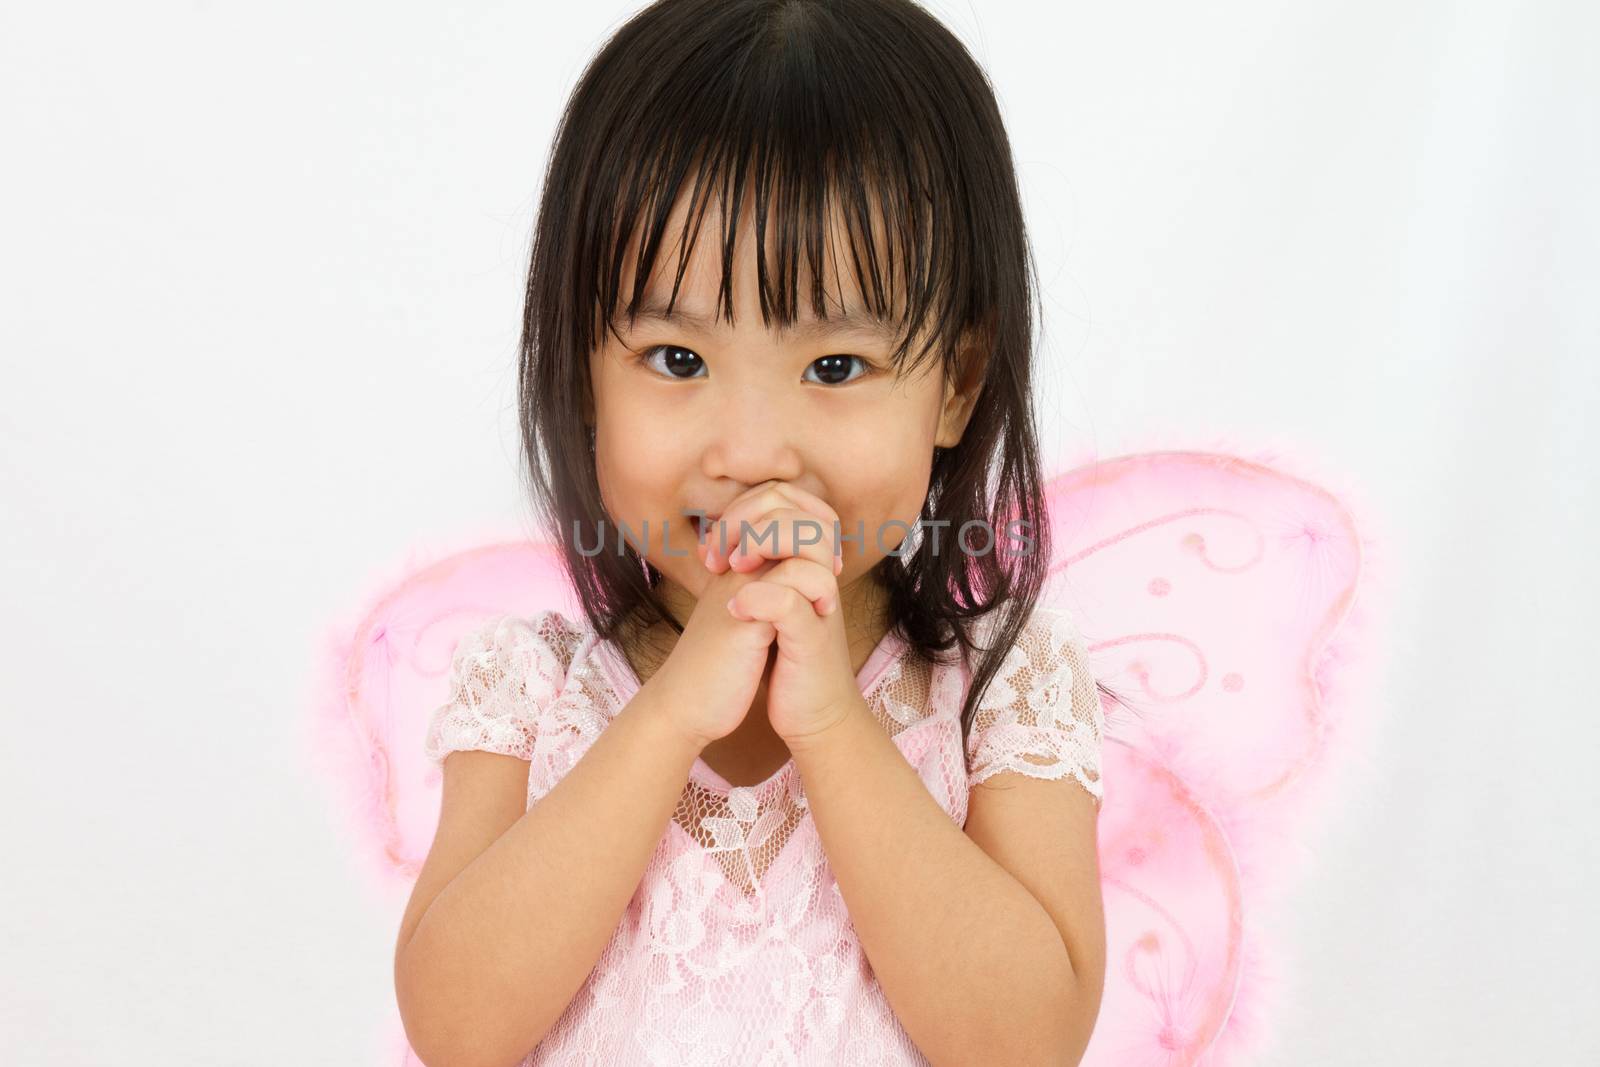 Chinese little girl wearing butterfly custome with praying gesture in plain white background